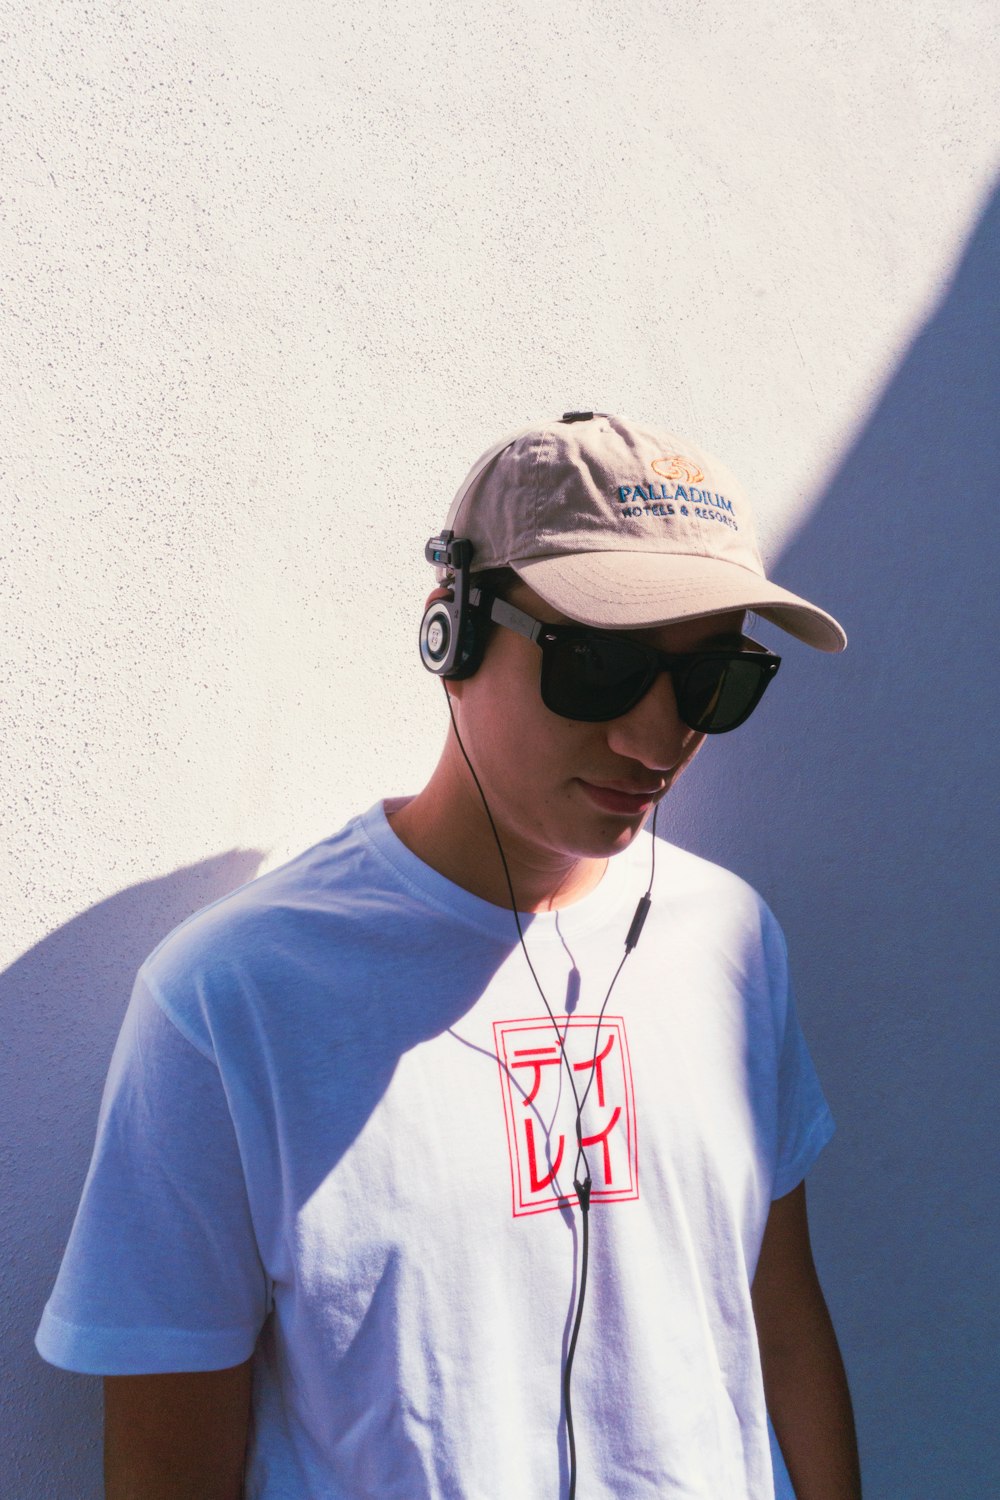 a young man wearing headphones and a hat